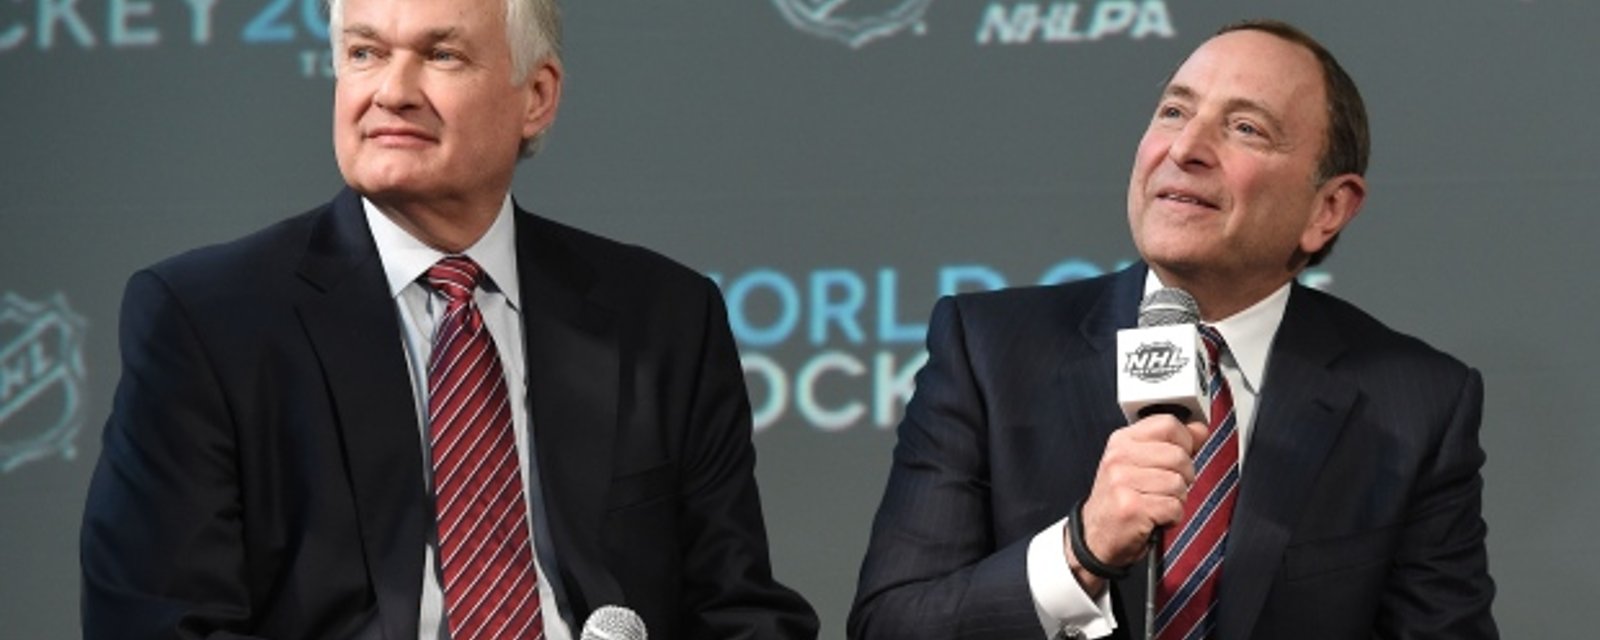  NHL &amp;amp; NHLPA finalize agreement on return to play.